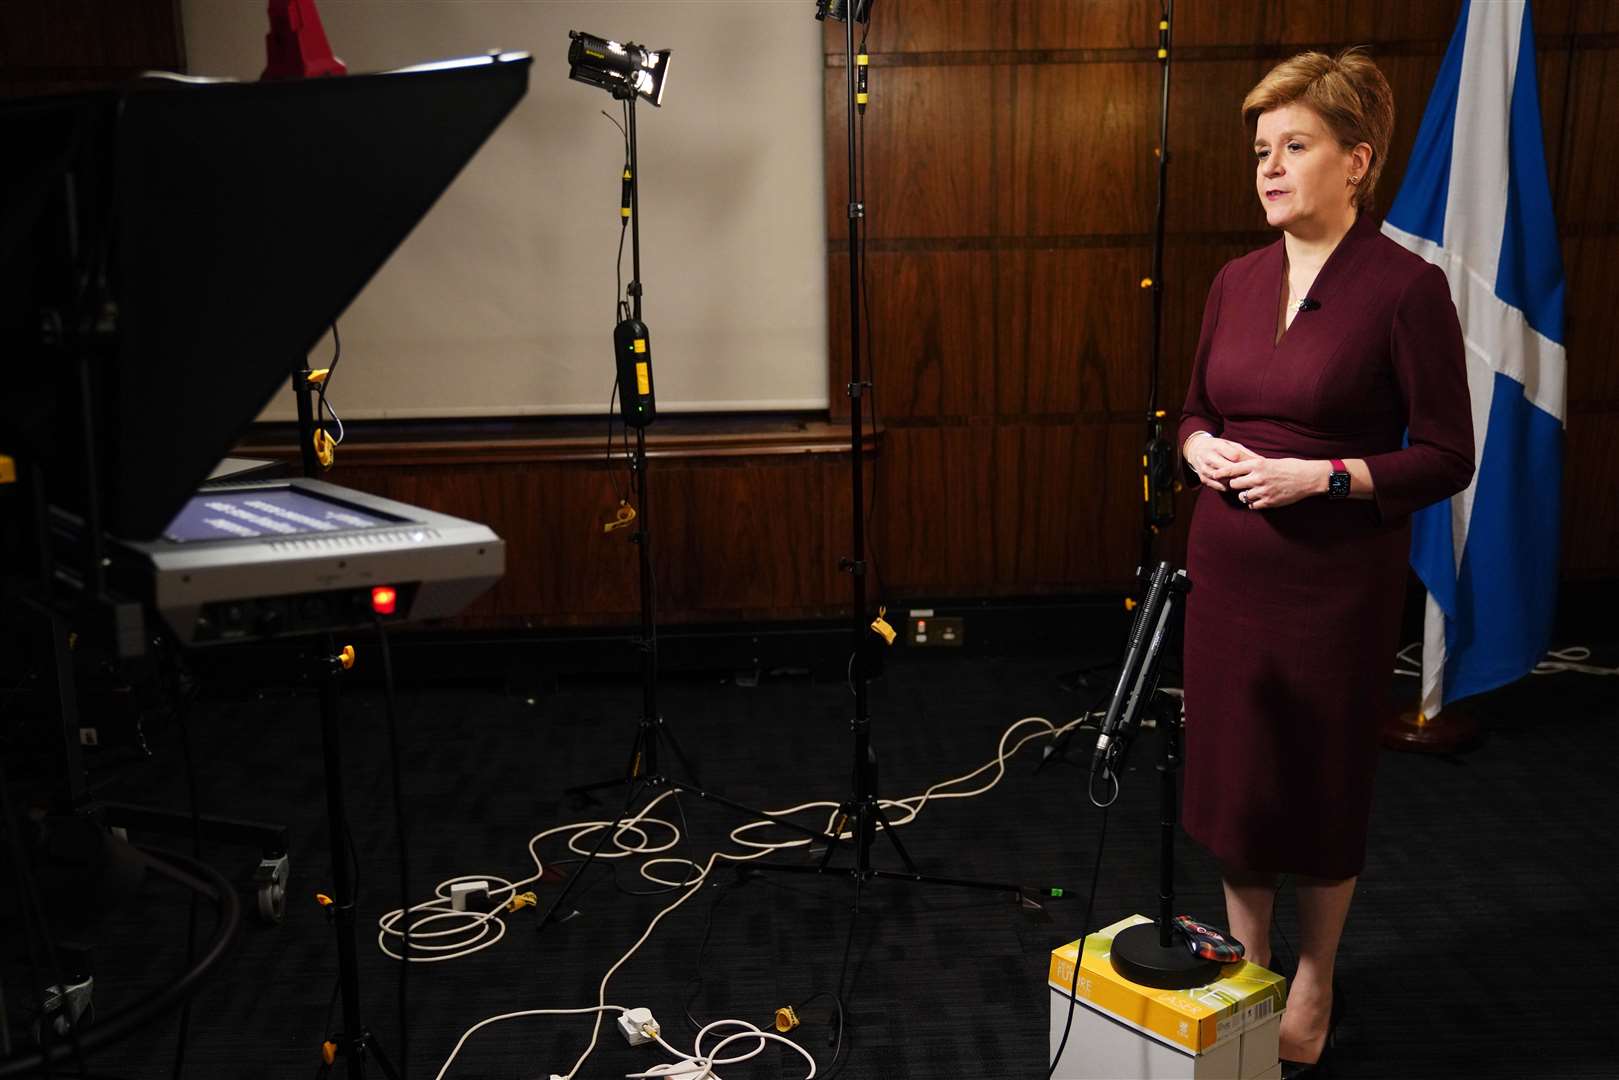 Nicola Sturgeon delivering her New Year message after a year that was 'dominated by the challenges of Covid'.